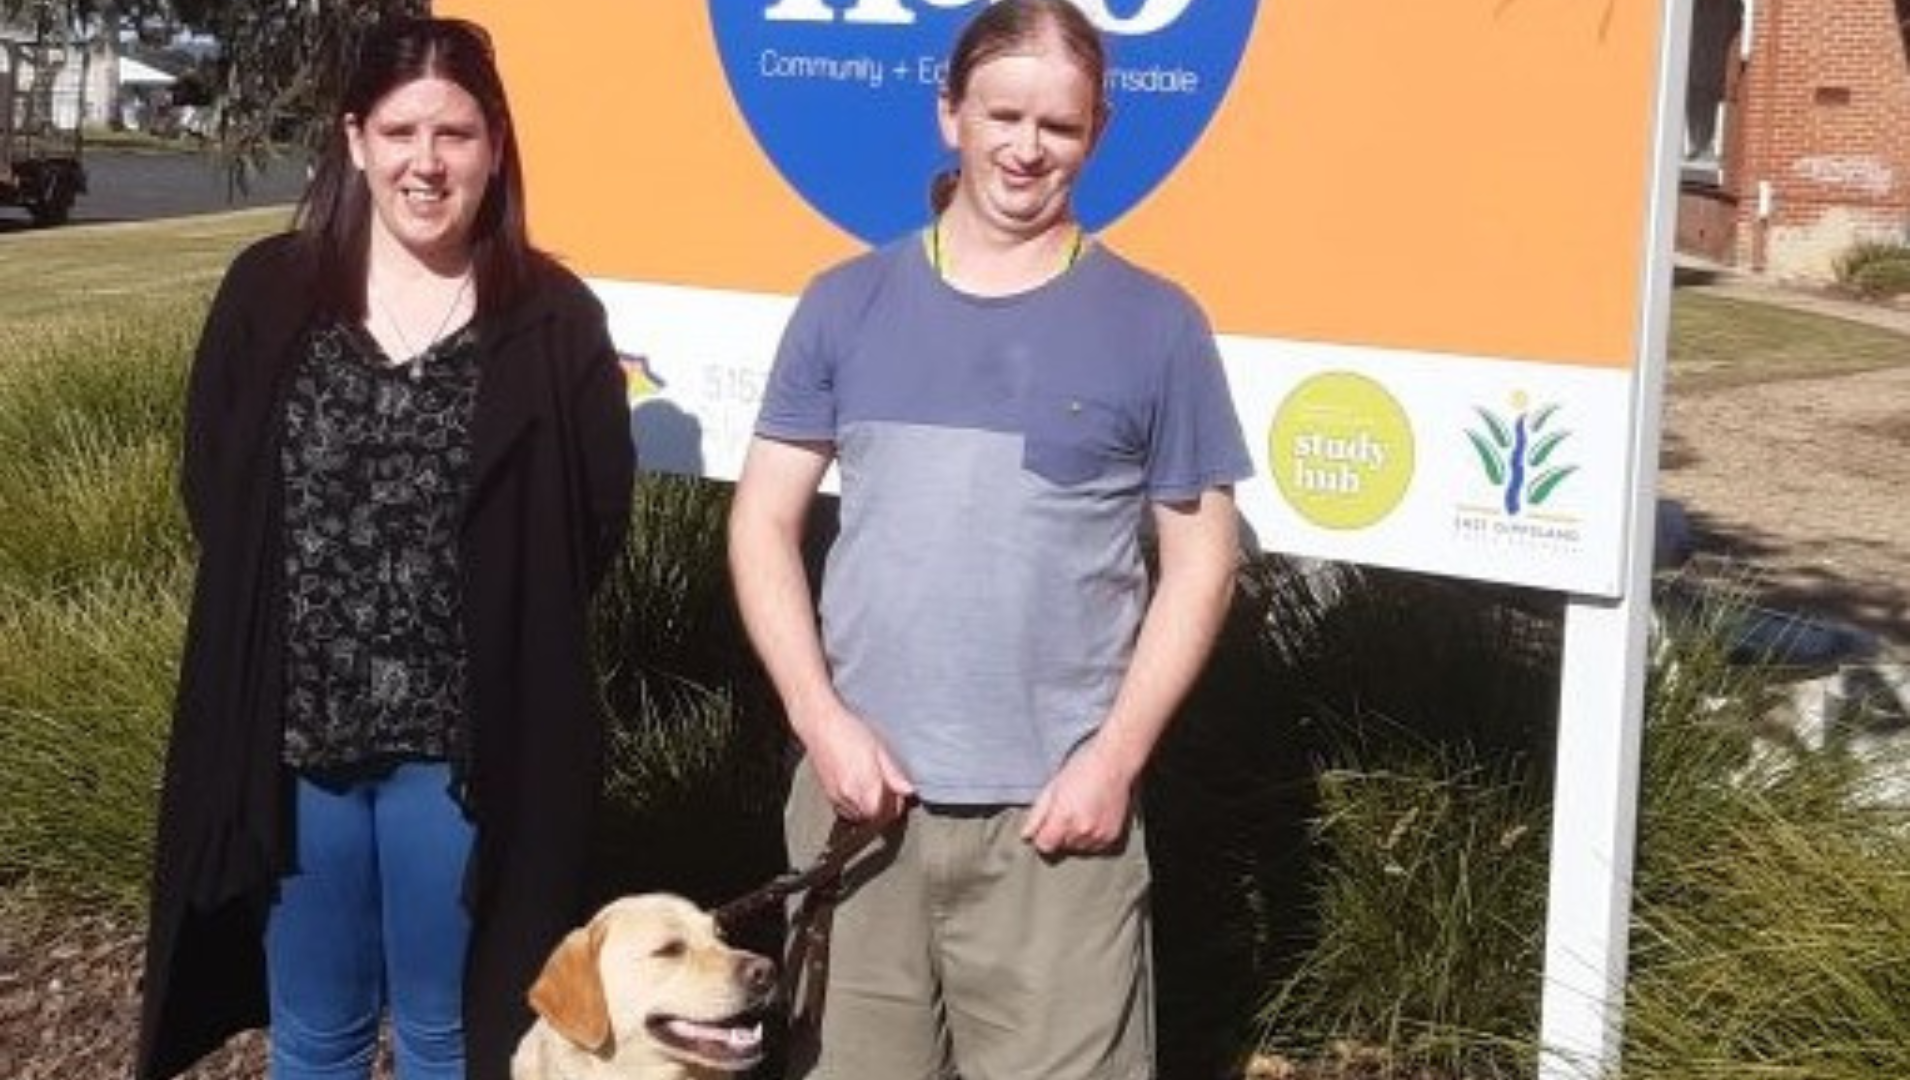 Ben standing in front of a community centre sign, with his golden Labrador guide dog